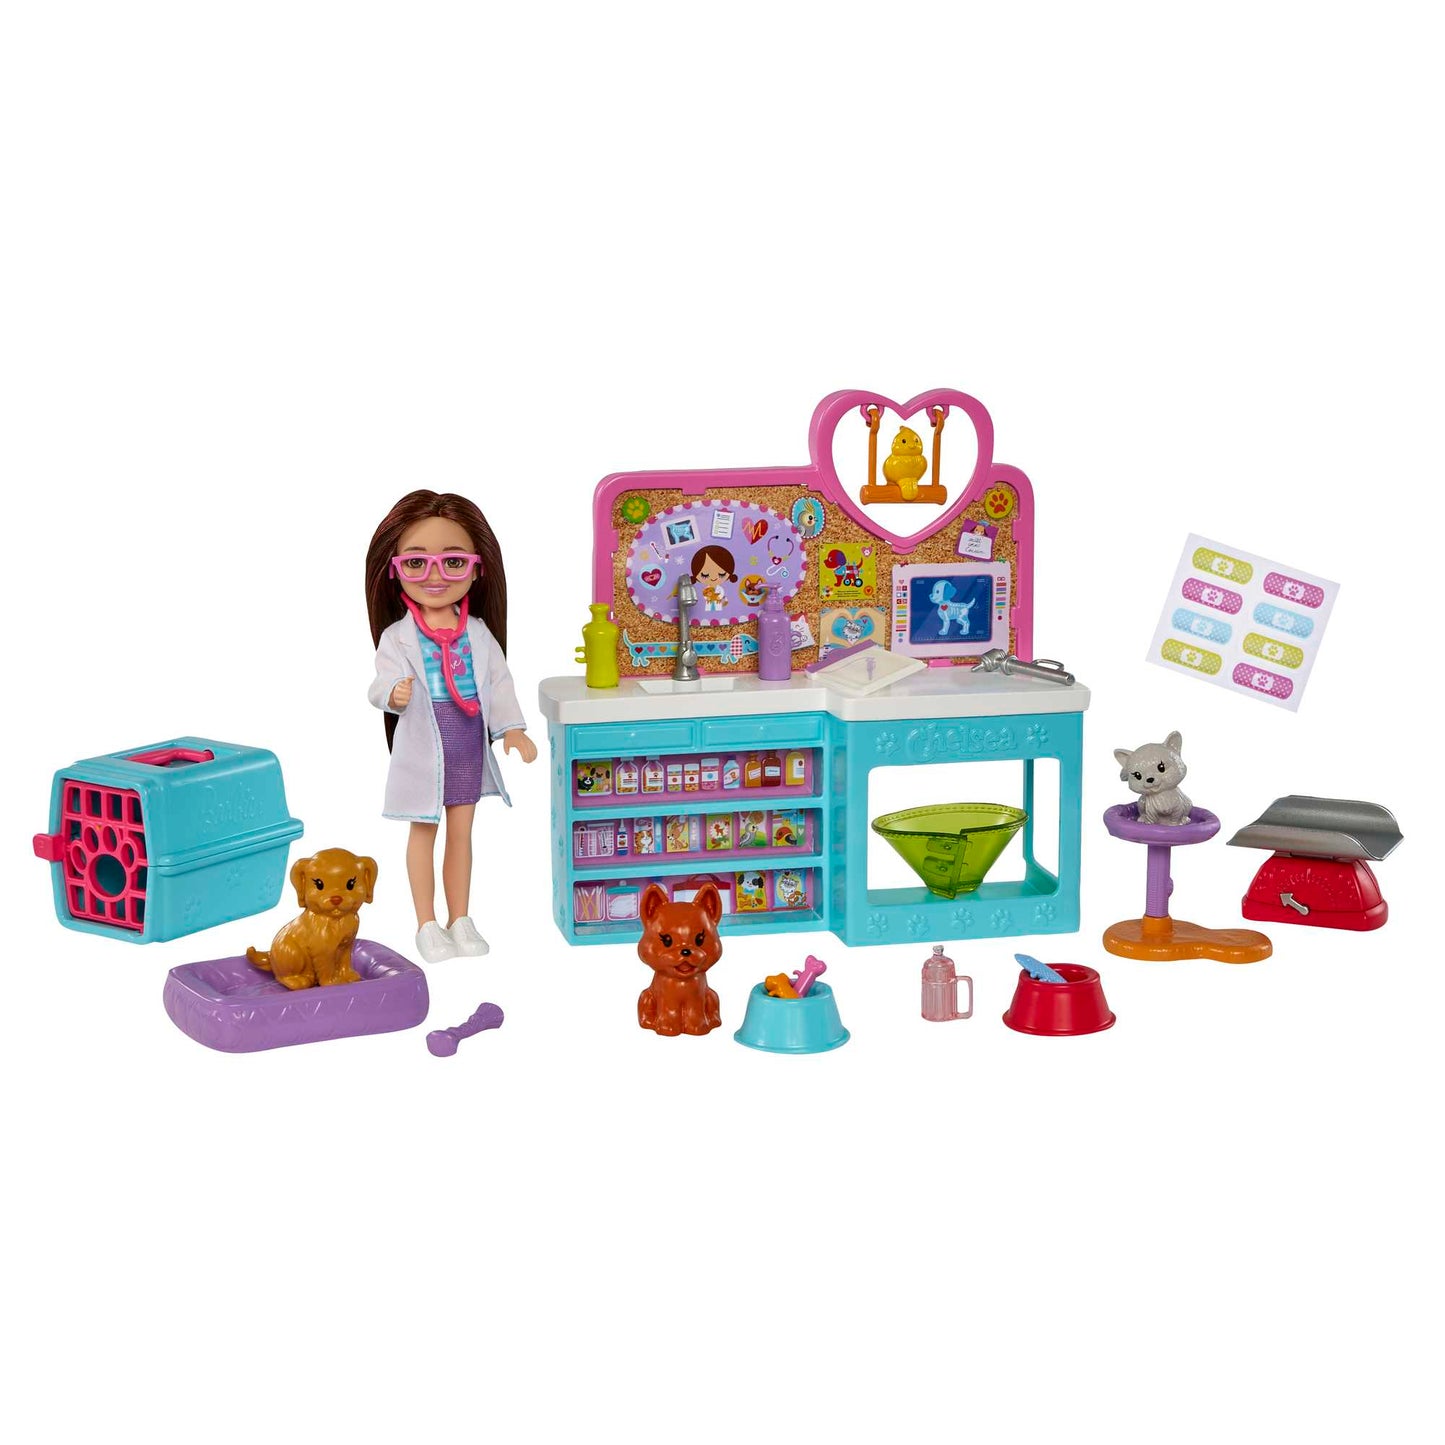 Barbie Chelsea Doll and Playset